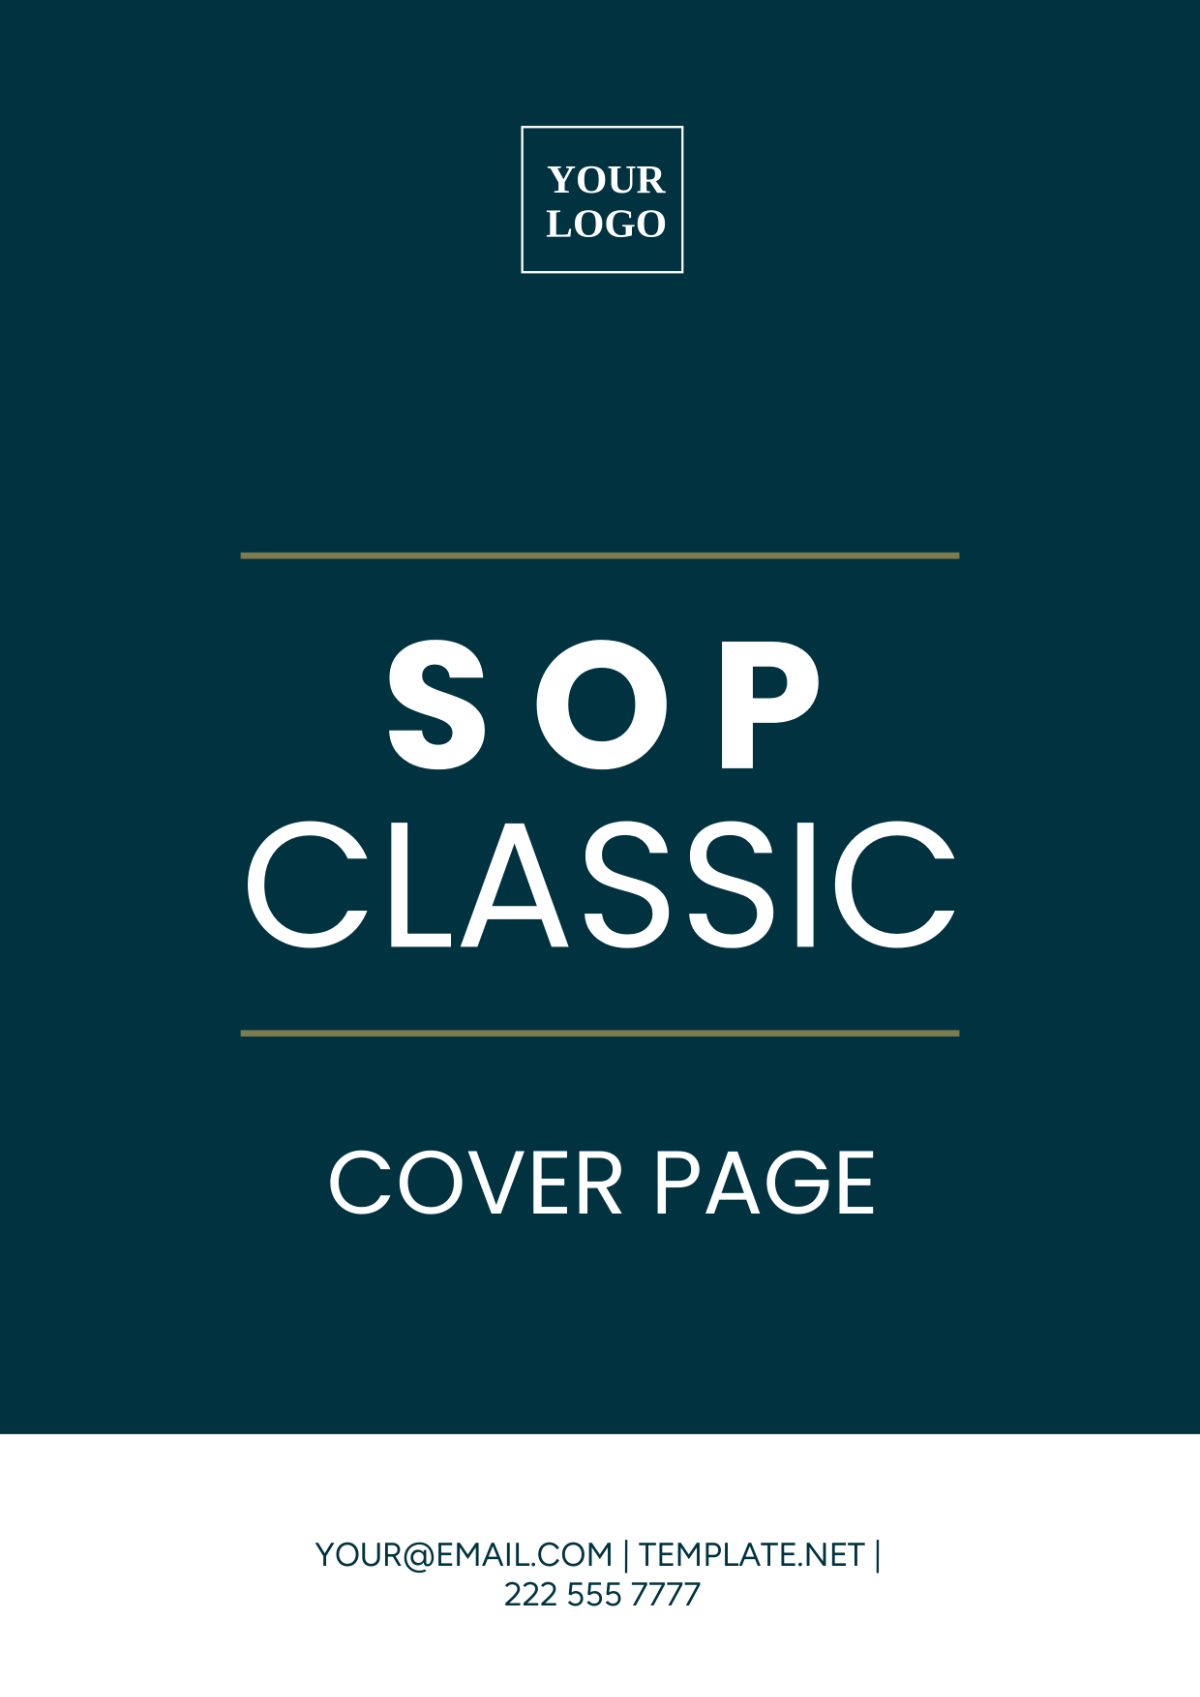 SOP Classic Cover Page Template